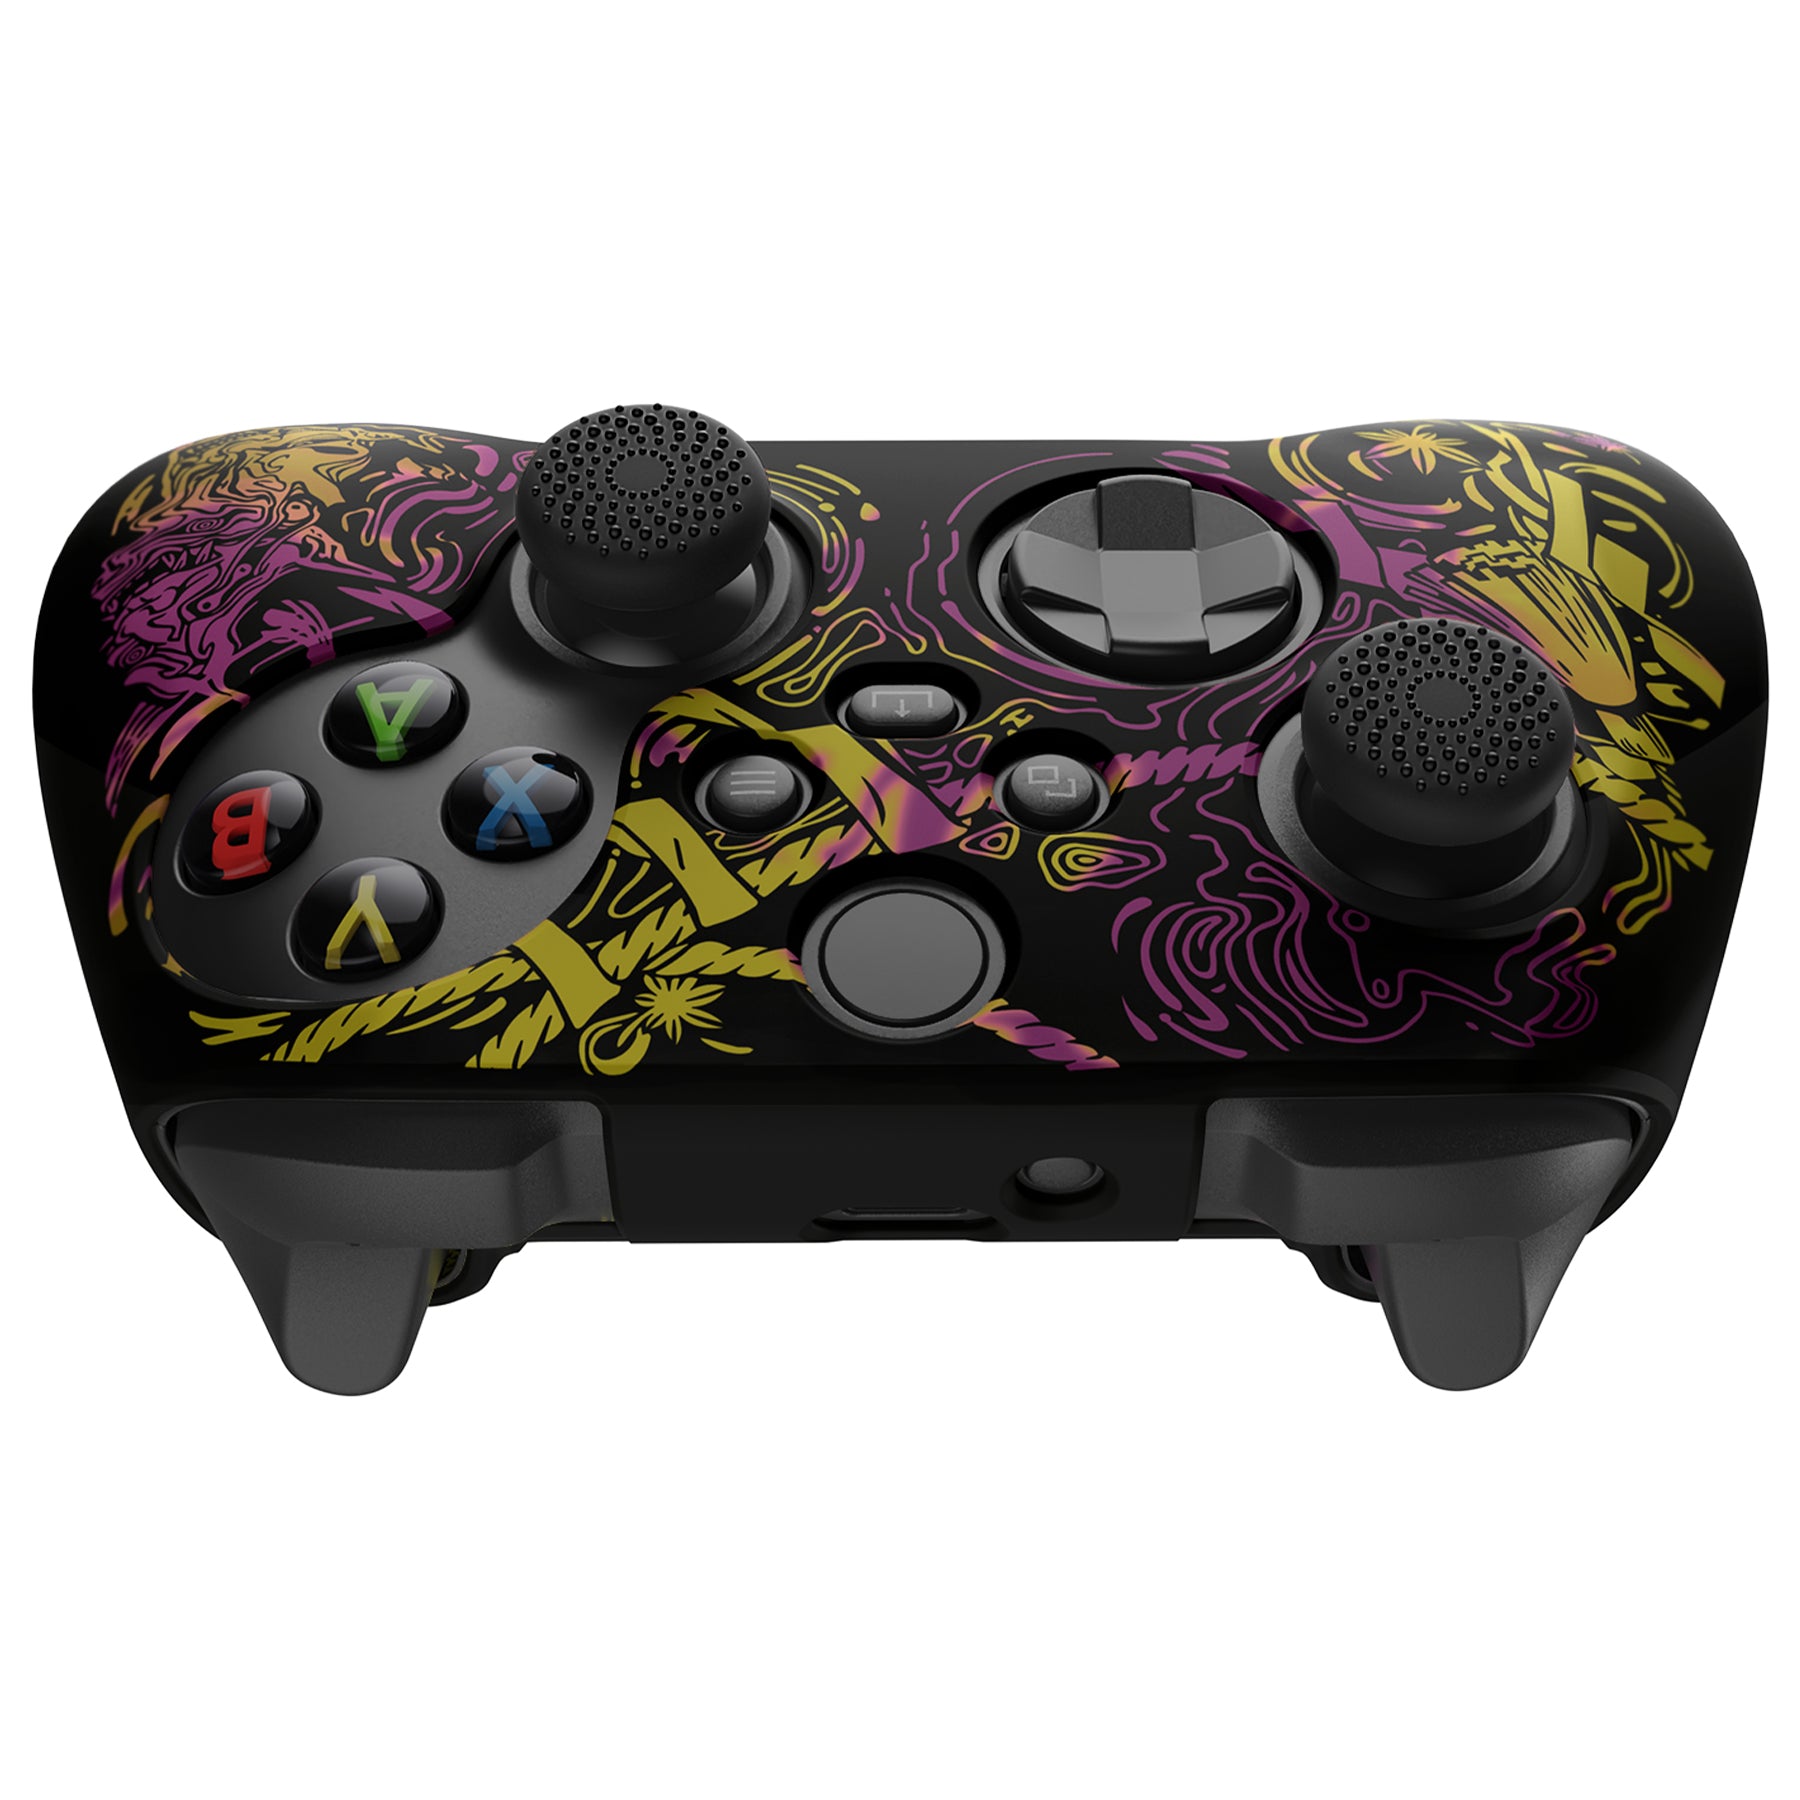 PlayVital Water Transfer Printing Samurai Prajna (Purple & Yellow) Silicone Cover Skin for Xbox Series X/S Controller, Soft Rubber Case Protector for Xbox Series X/S, Xbox Core Controller wtih 6 Thumb Grip Caps - BLX3026 PlayVital